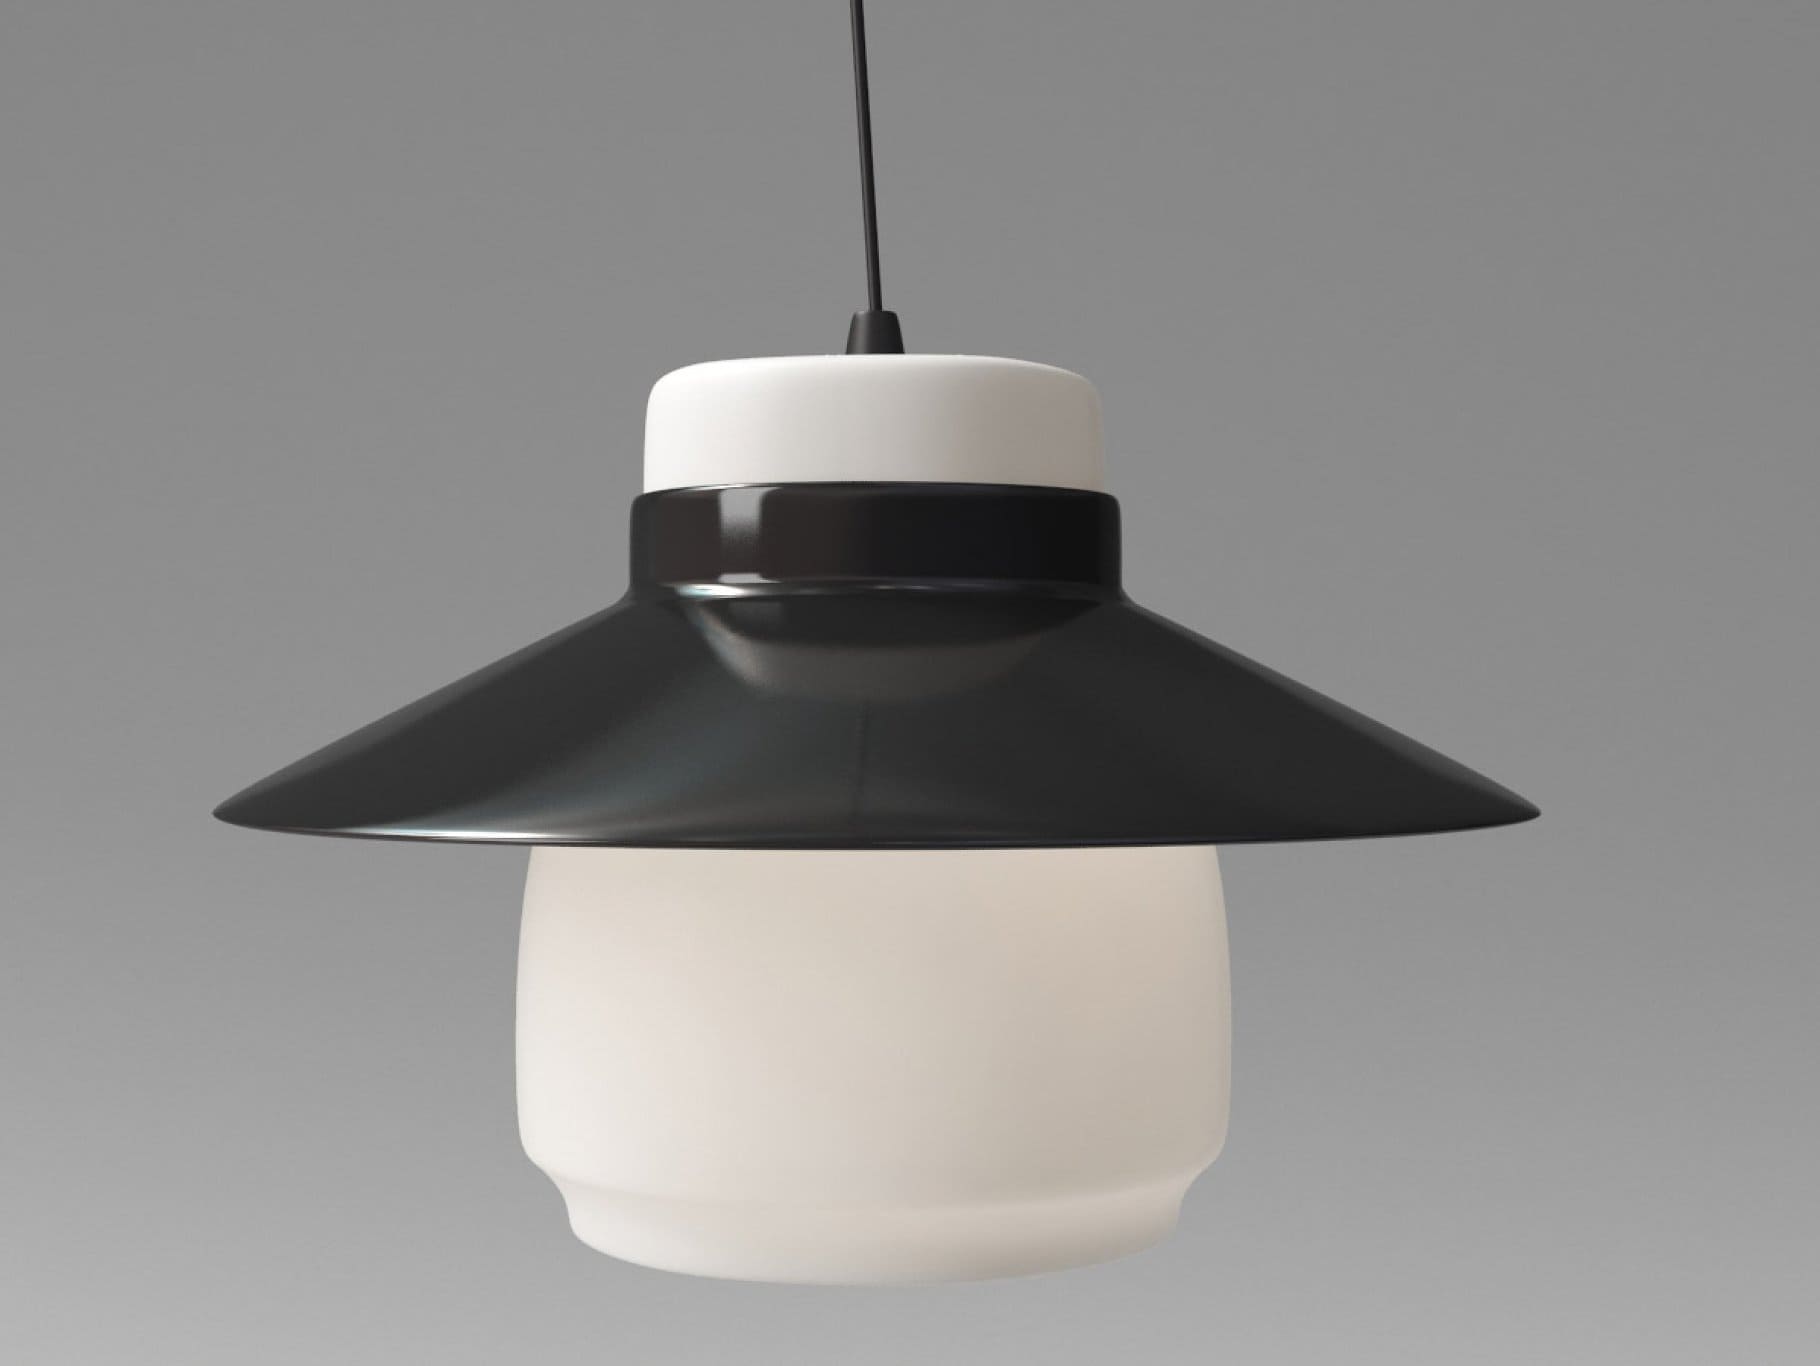 Black and white Lento lamp with a thick white center.